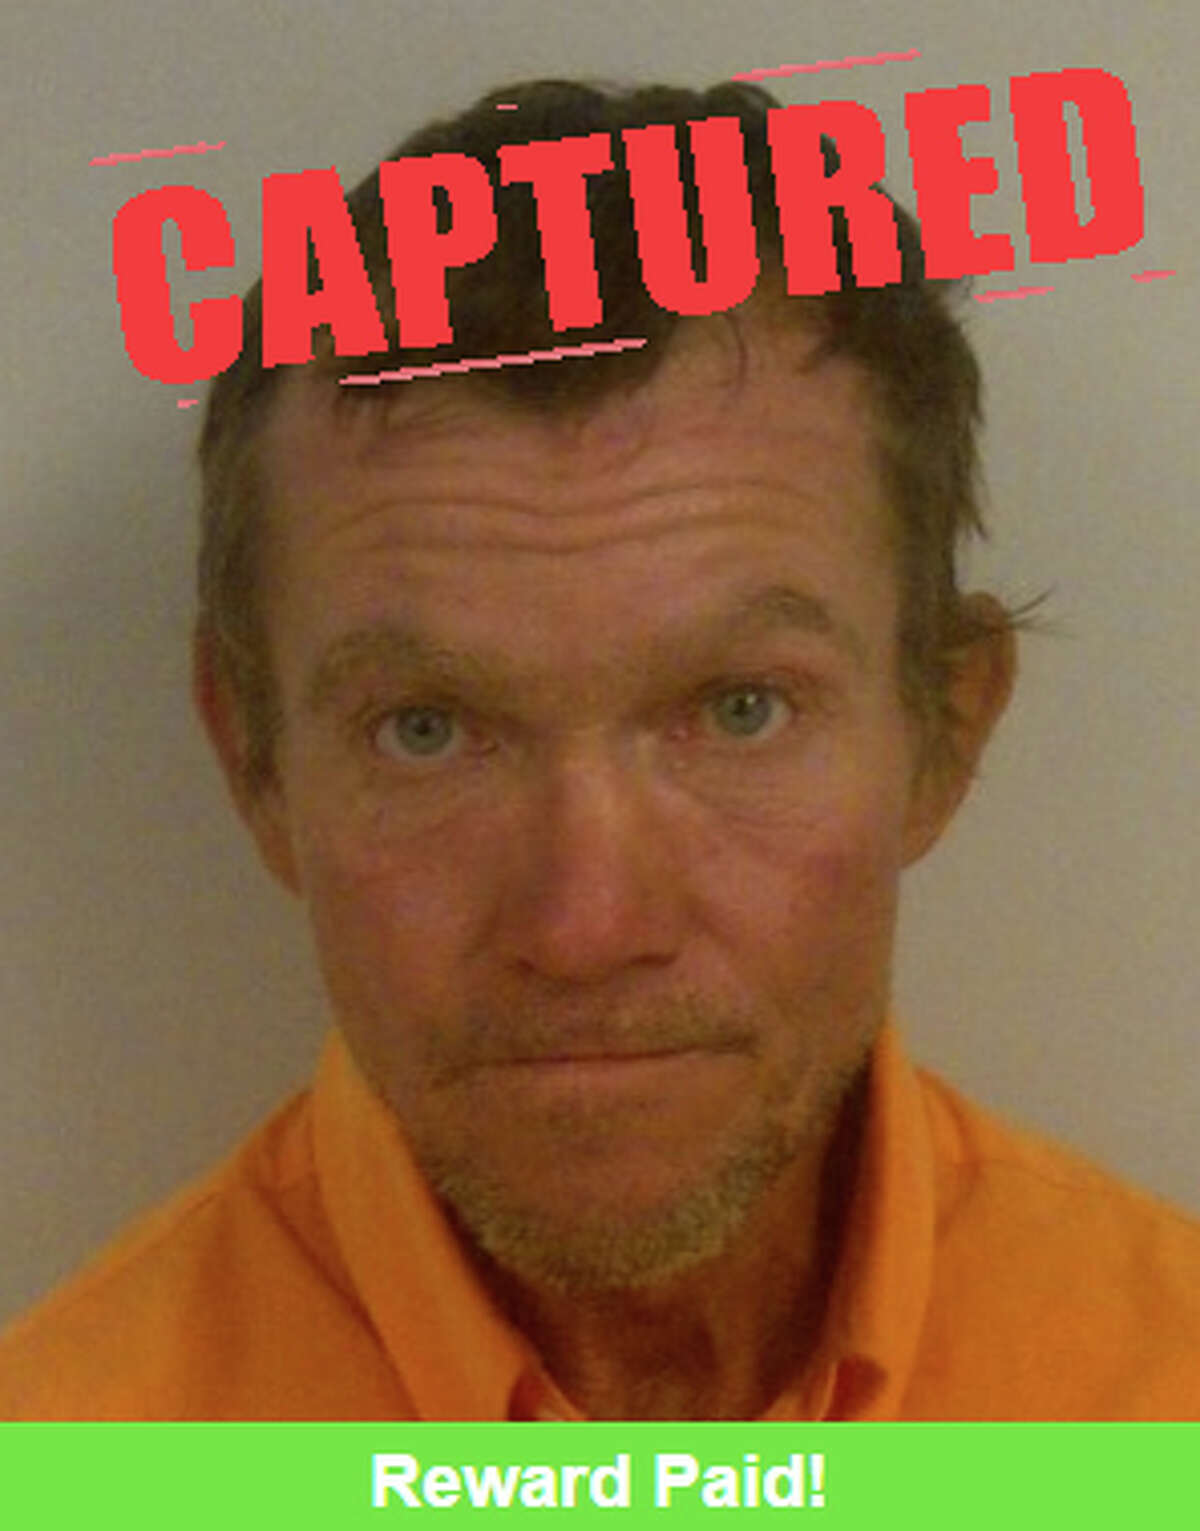 Texas Most Wanted Fugitive Caught In Florida 0269